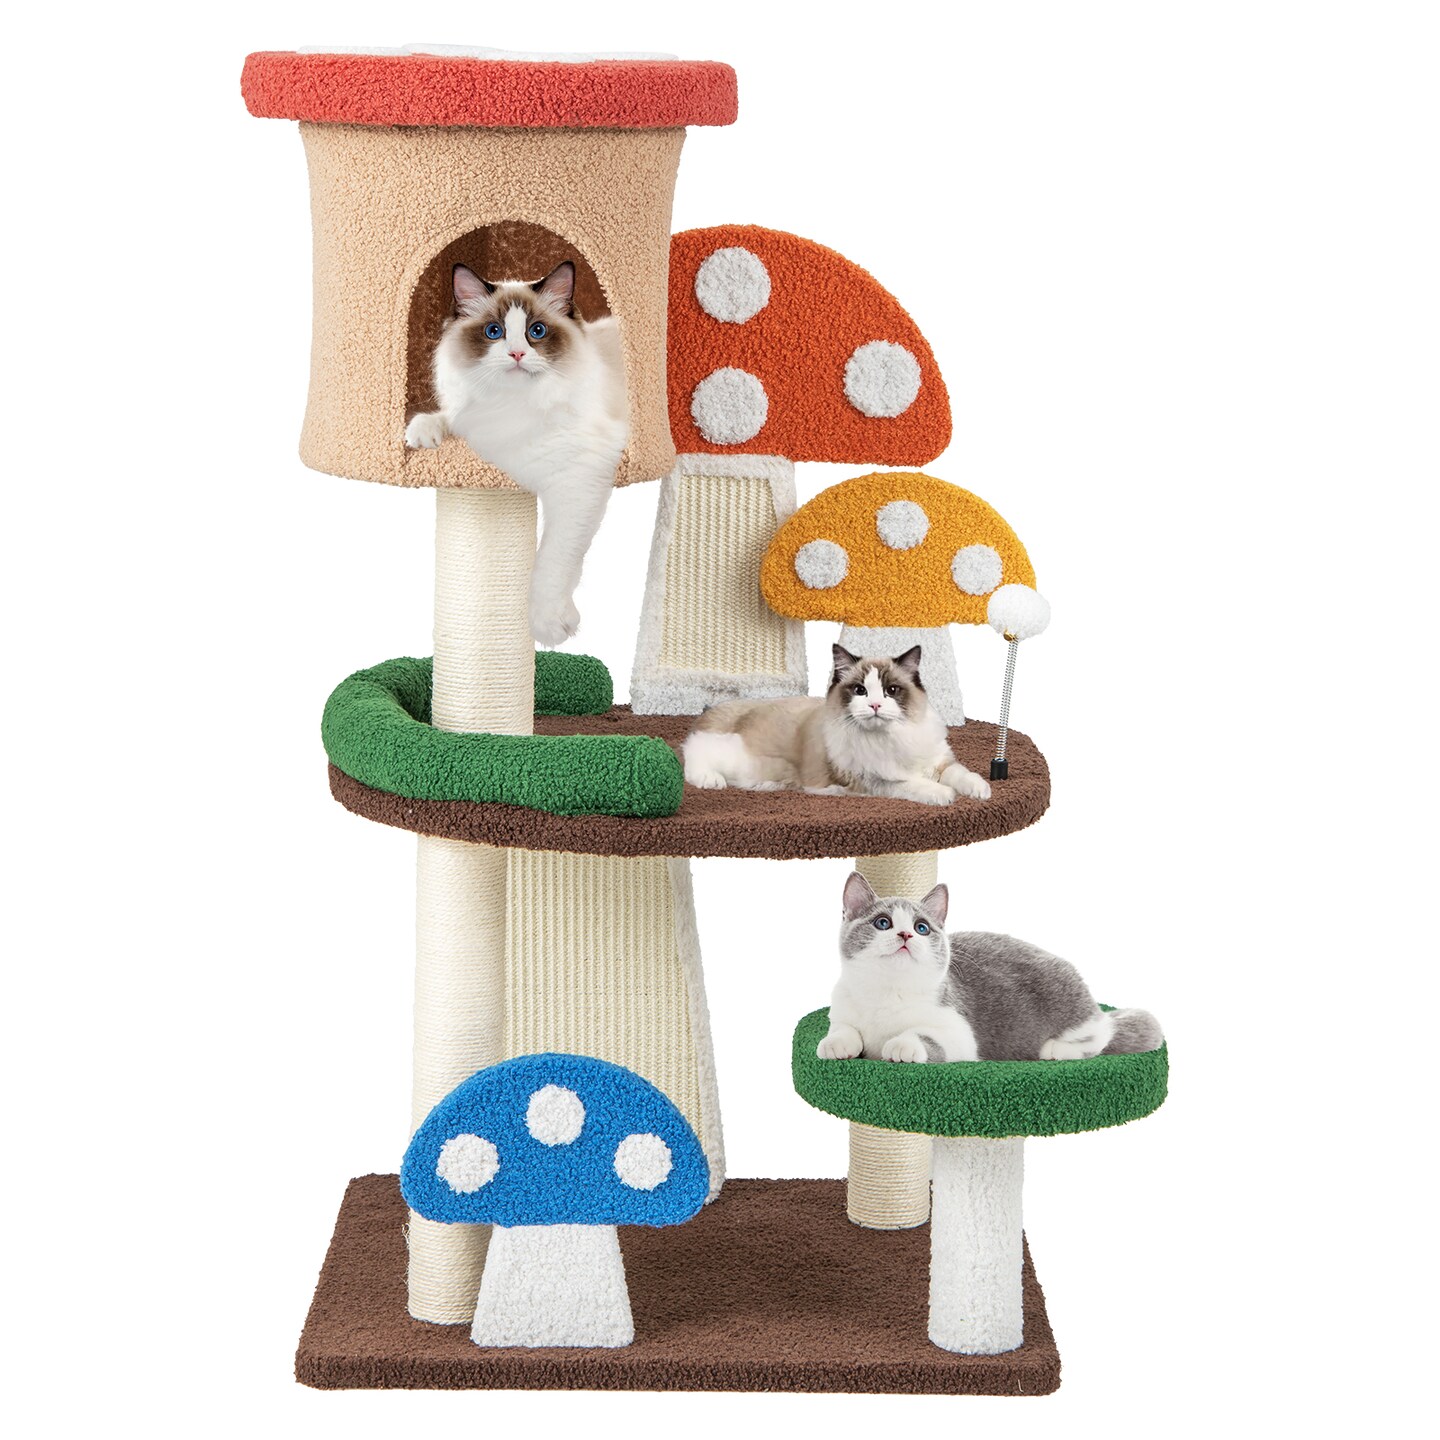 4-in-1 Mushroom Cat Tree With Condo Spring Ball And Sisal Posts-multicolor